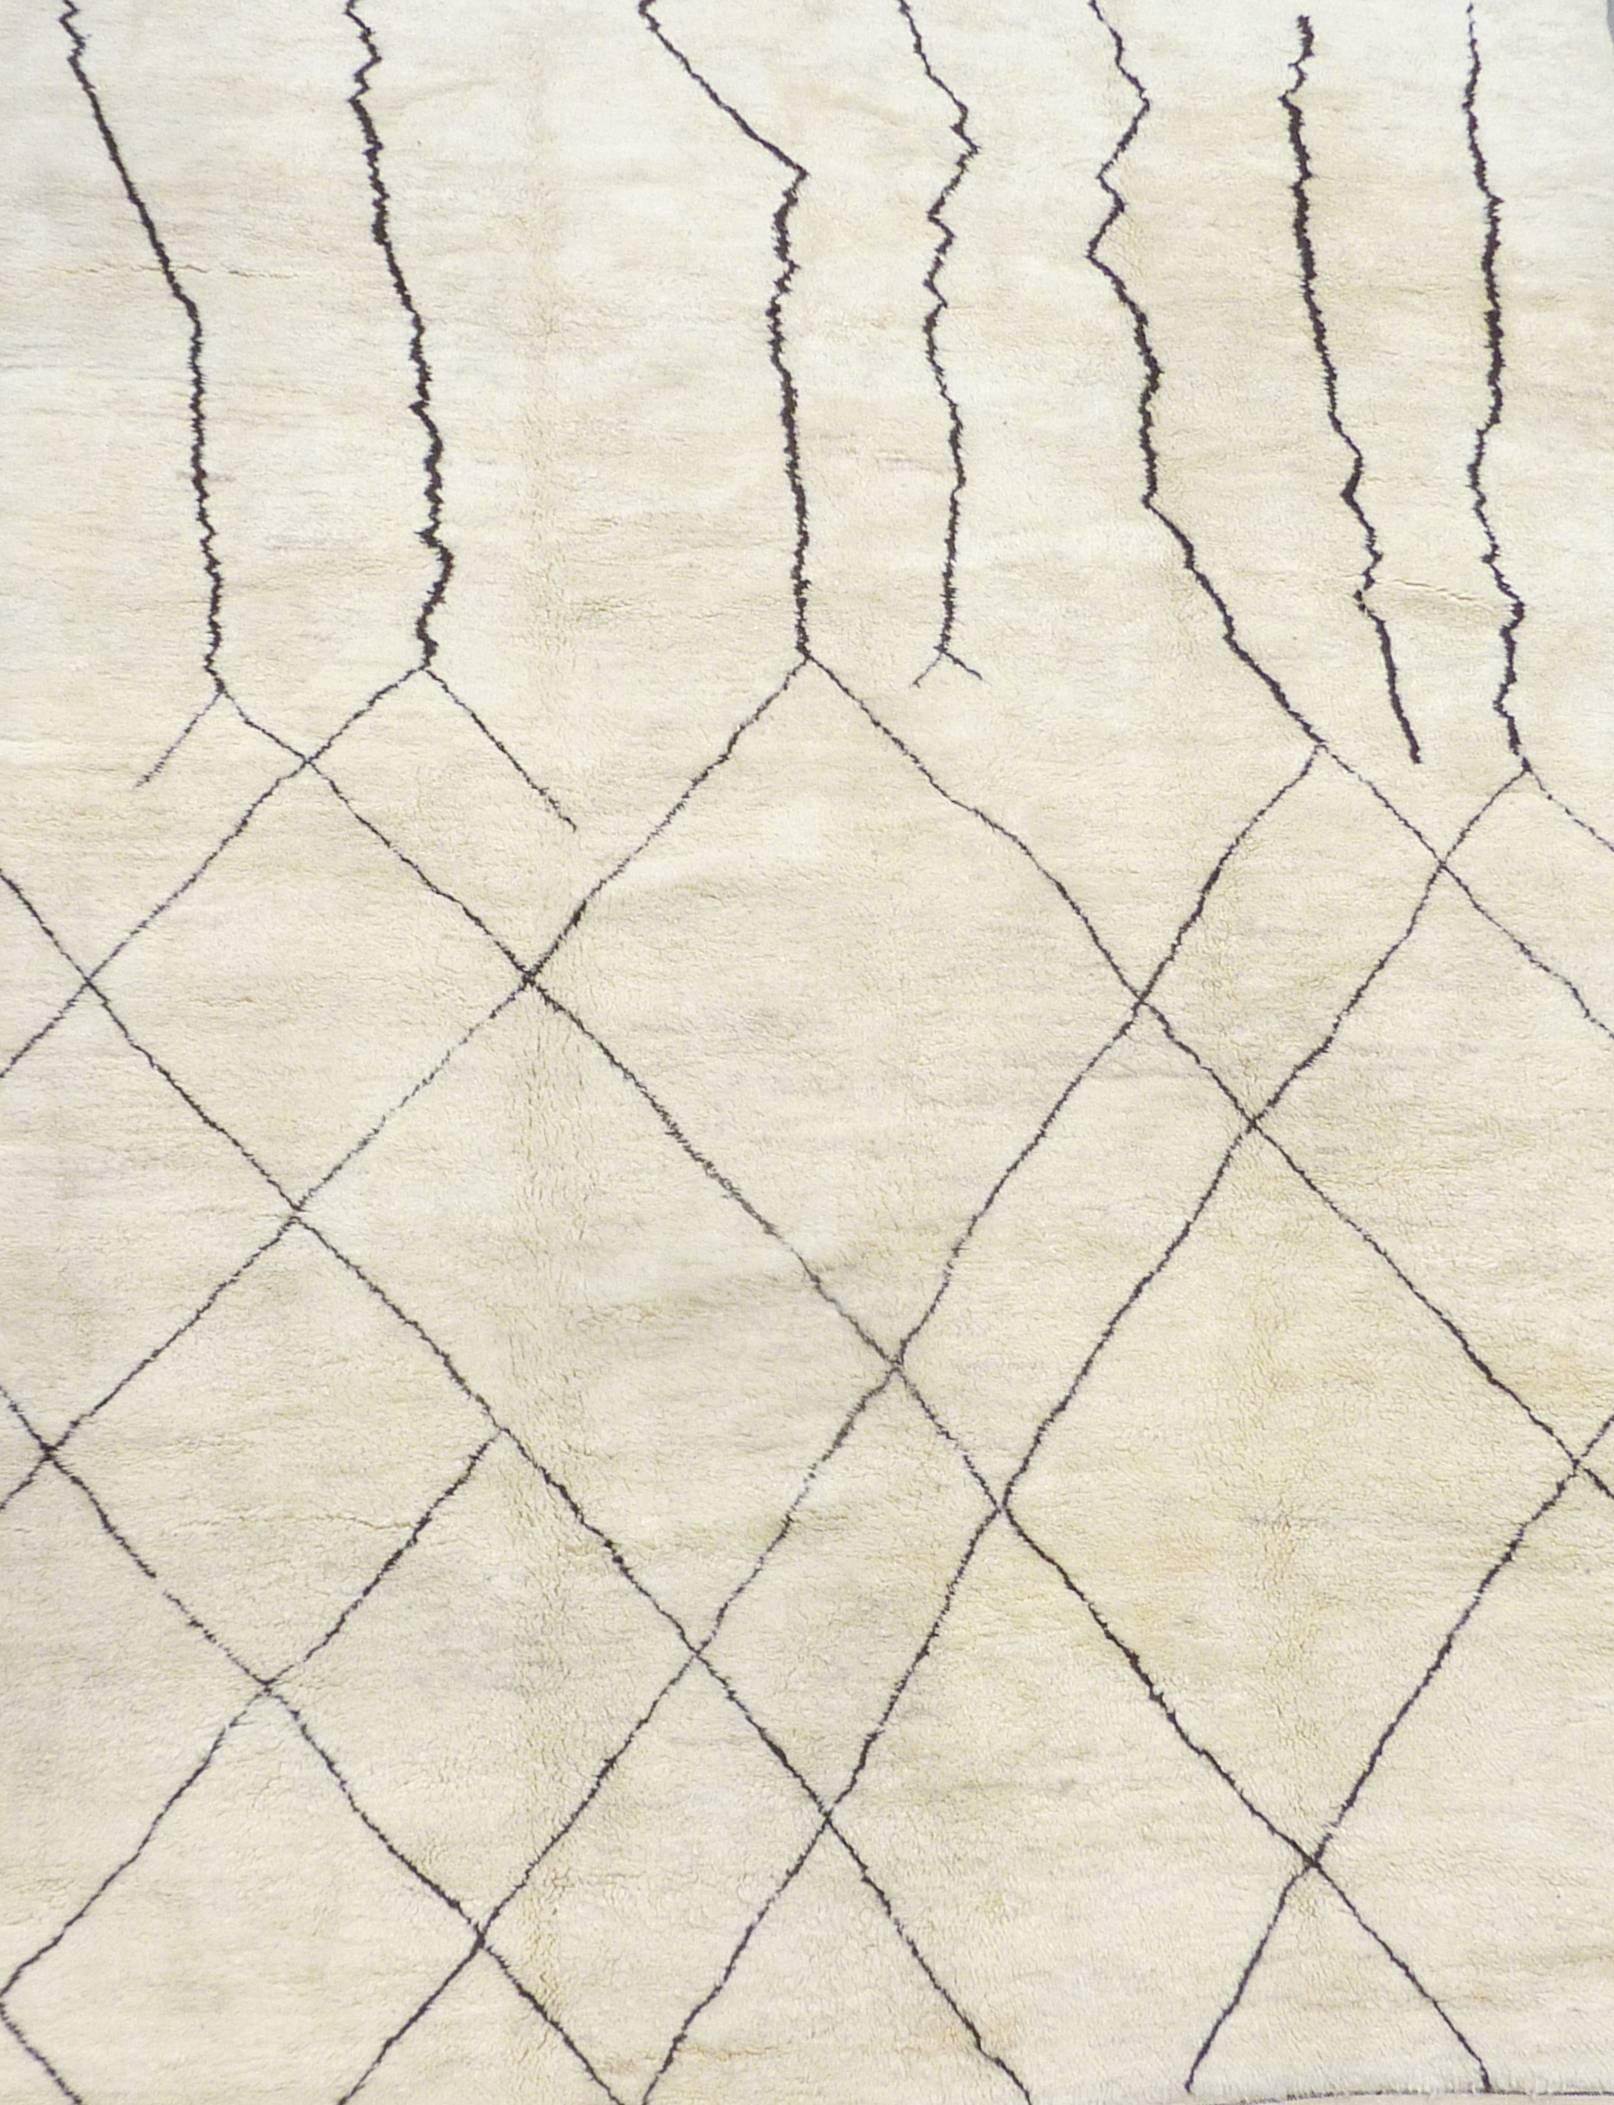 Soft, ivory carpet. Moroccan, Beni Ourain carpets are woven from un-dyed natural wool and traditionally decorated with geometric designs. These magnificent rugs have the fascinating ability to connect the long history of the nomadic Berber tribes